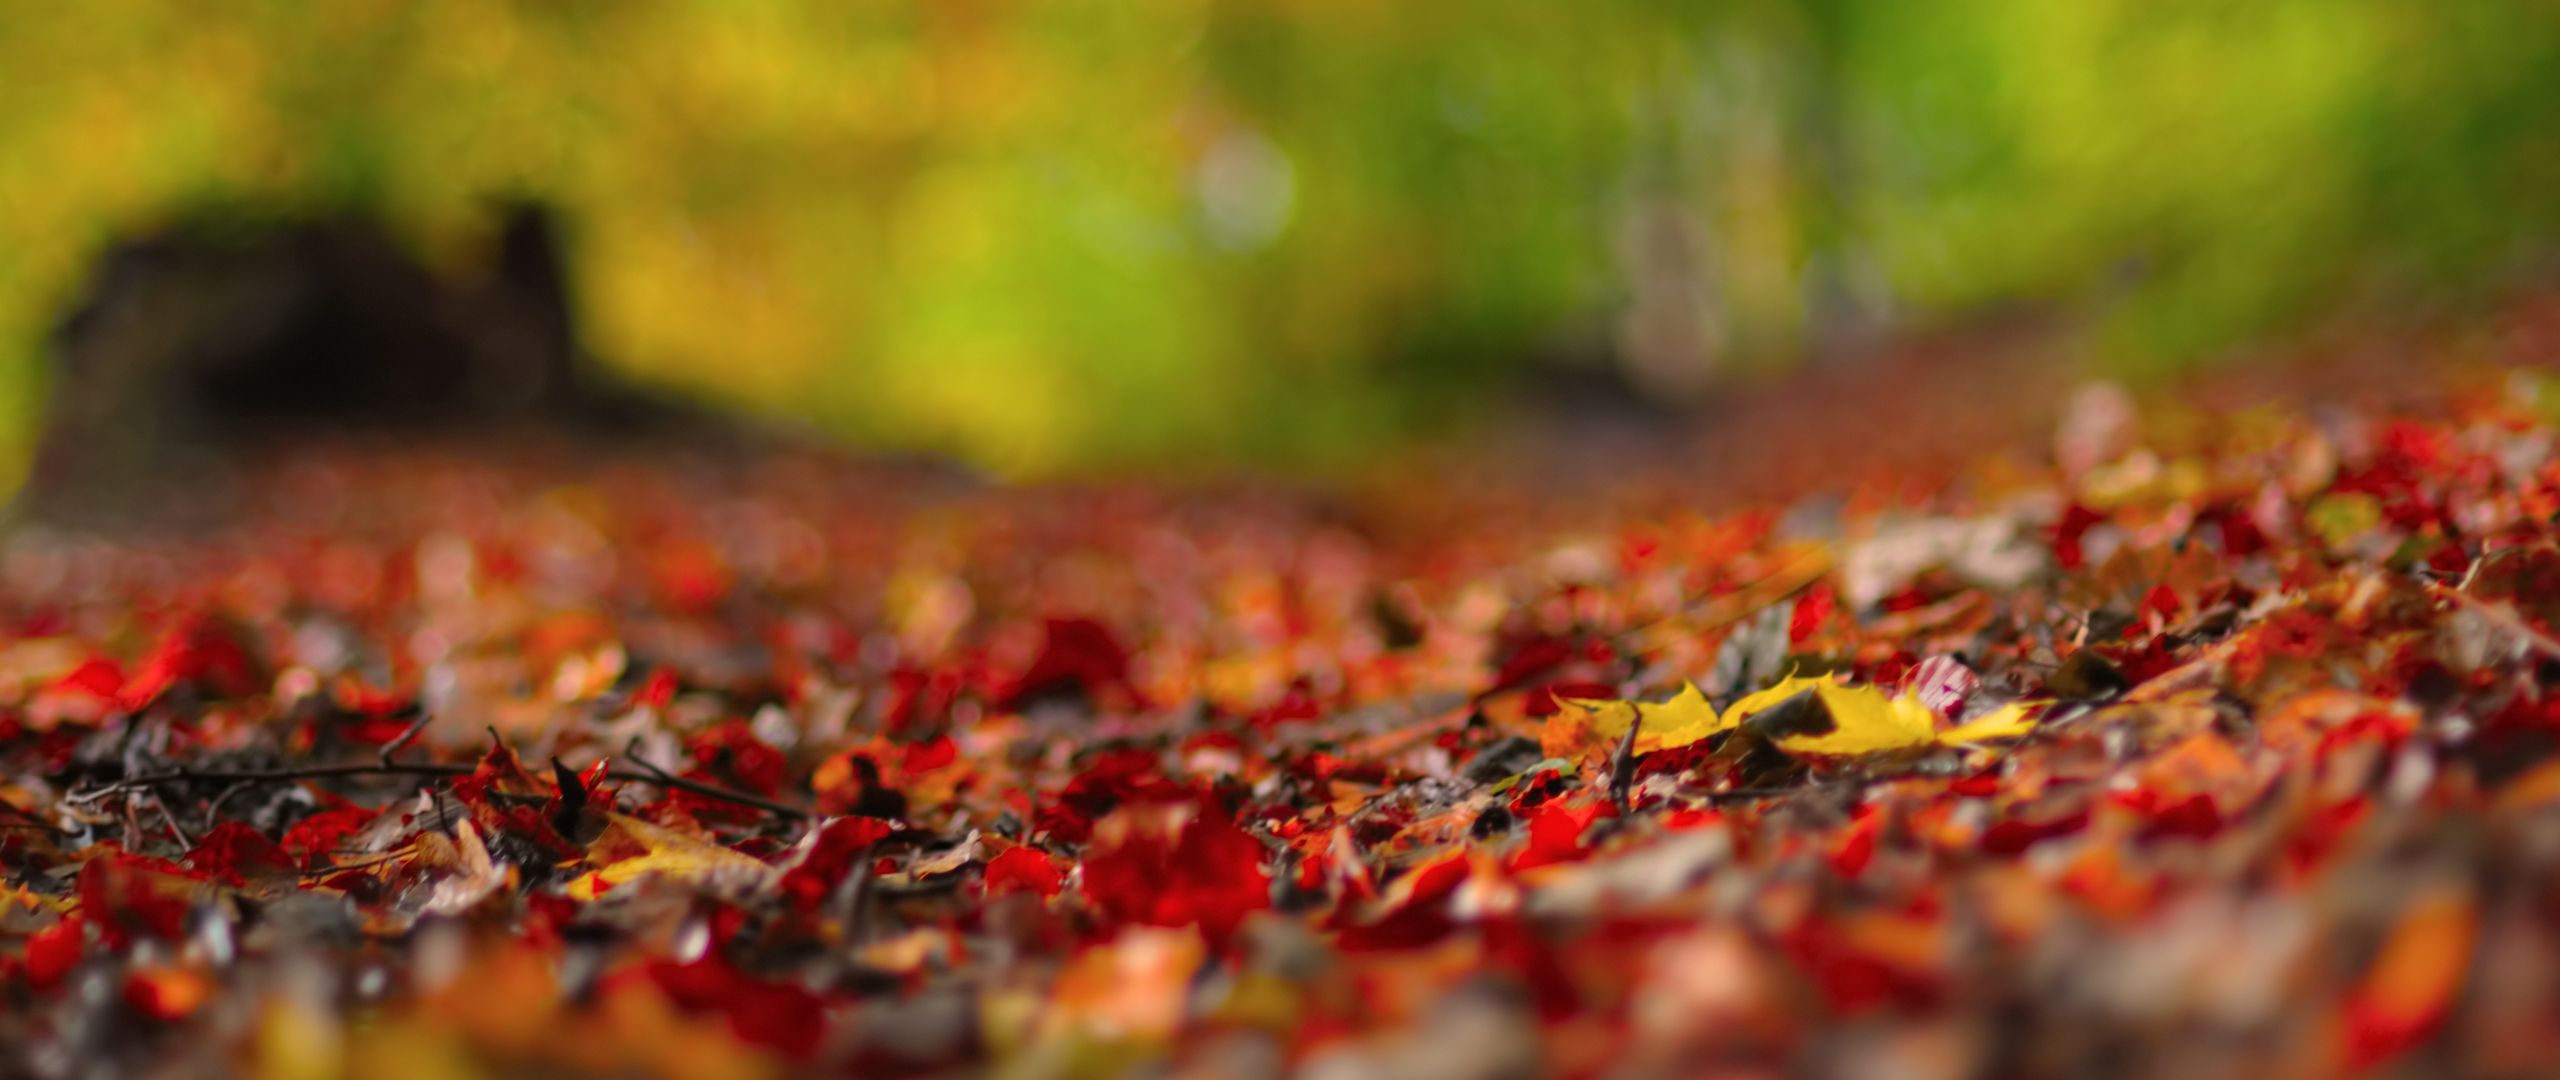 Download wallpaper 2560x1080 background, foliage, surface, fall dual wide  1080p hd background